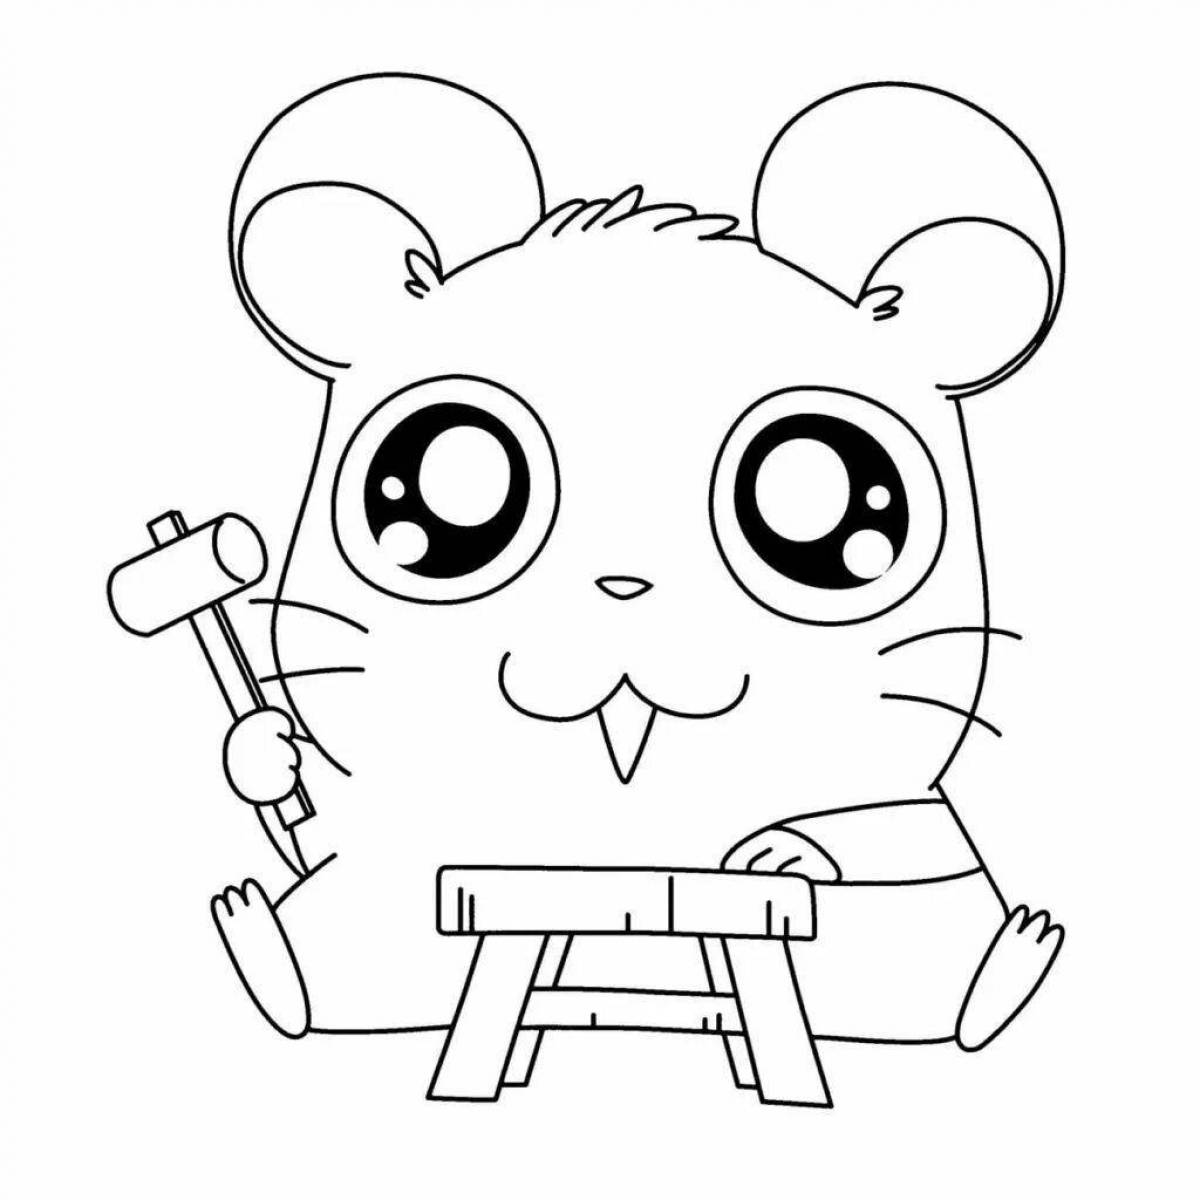 Naughty hamster coloring page